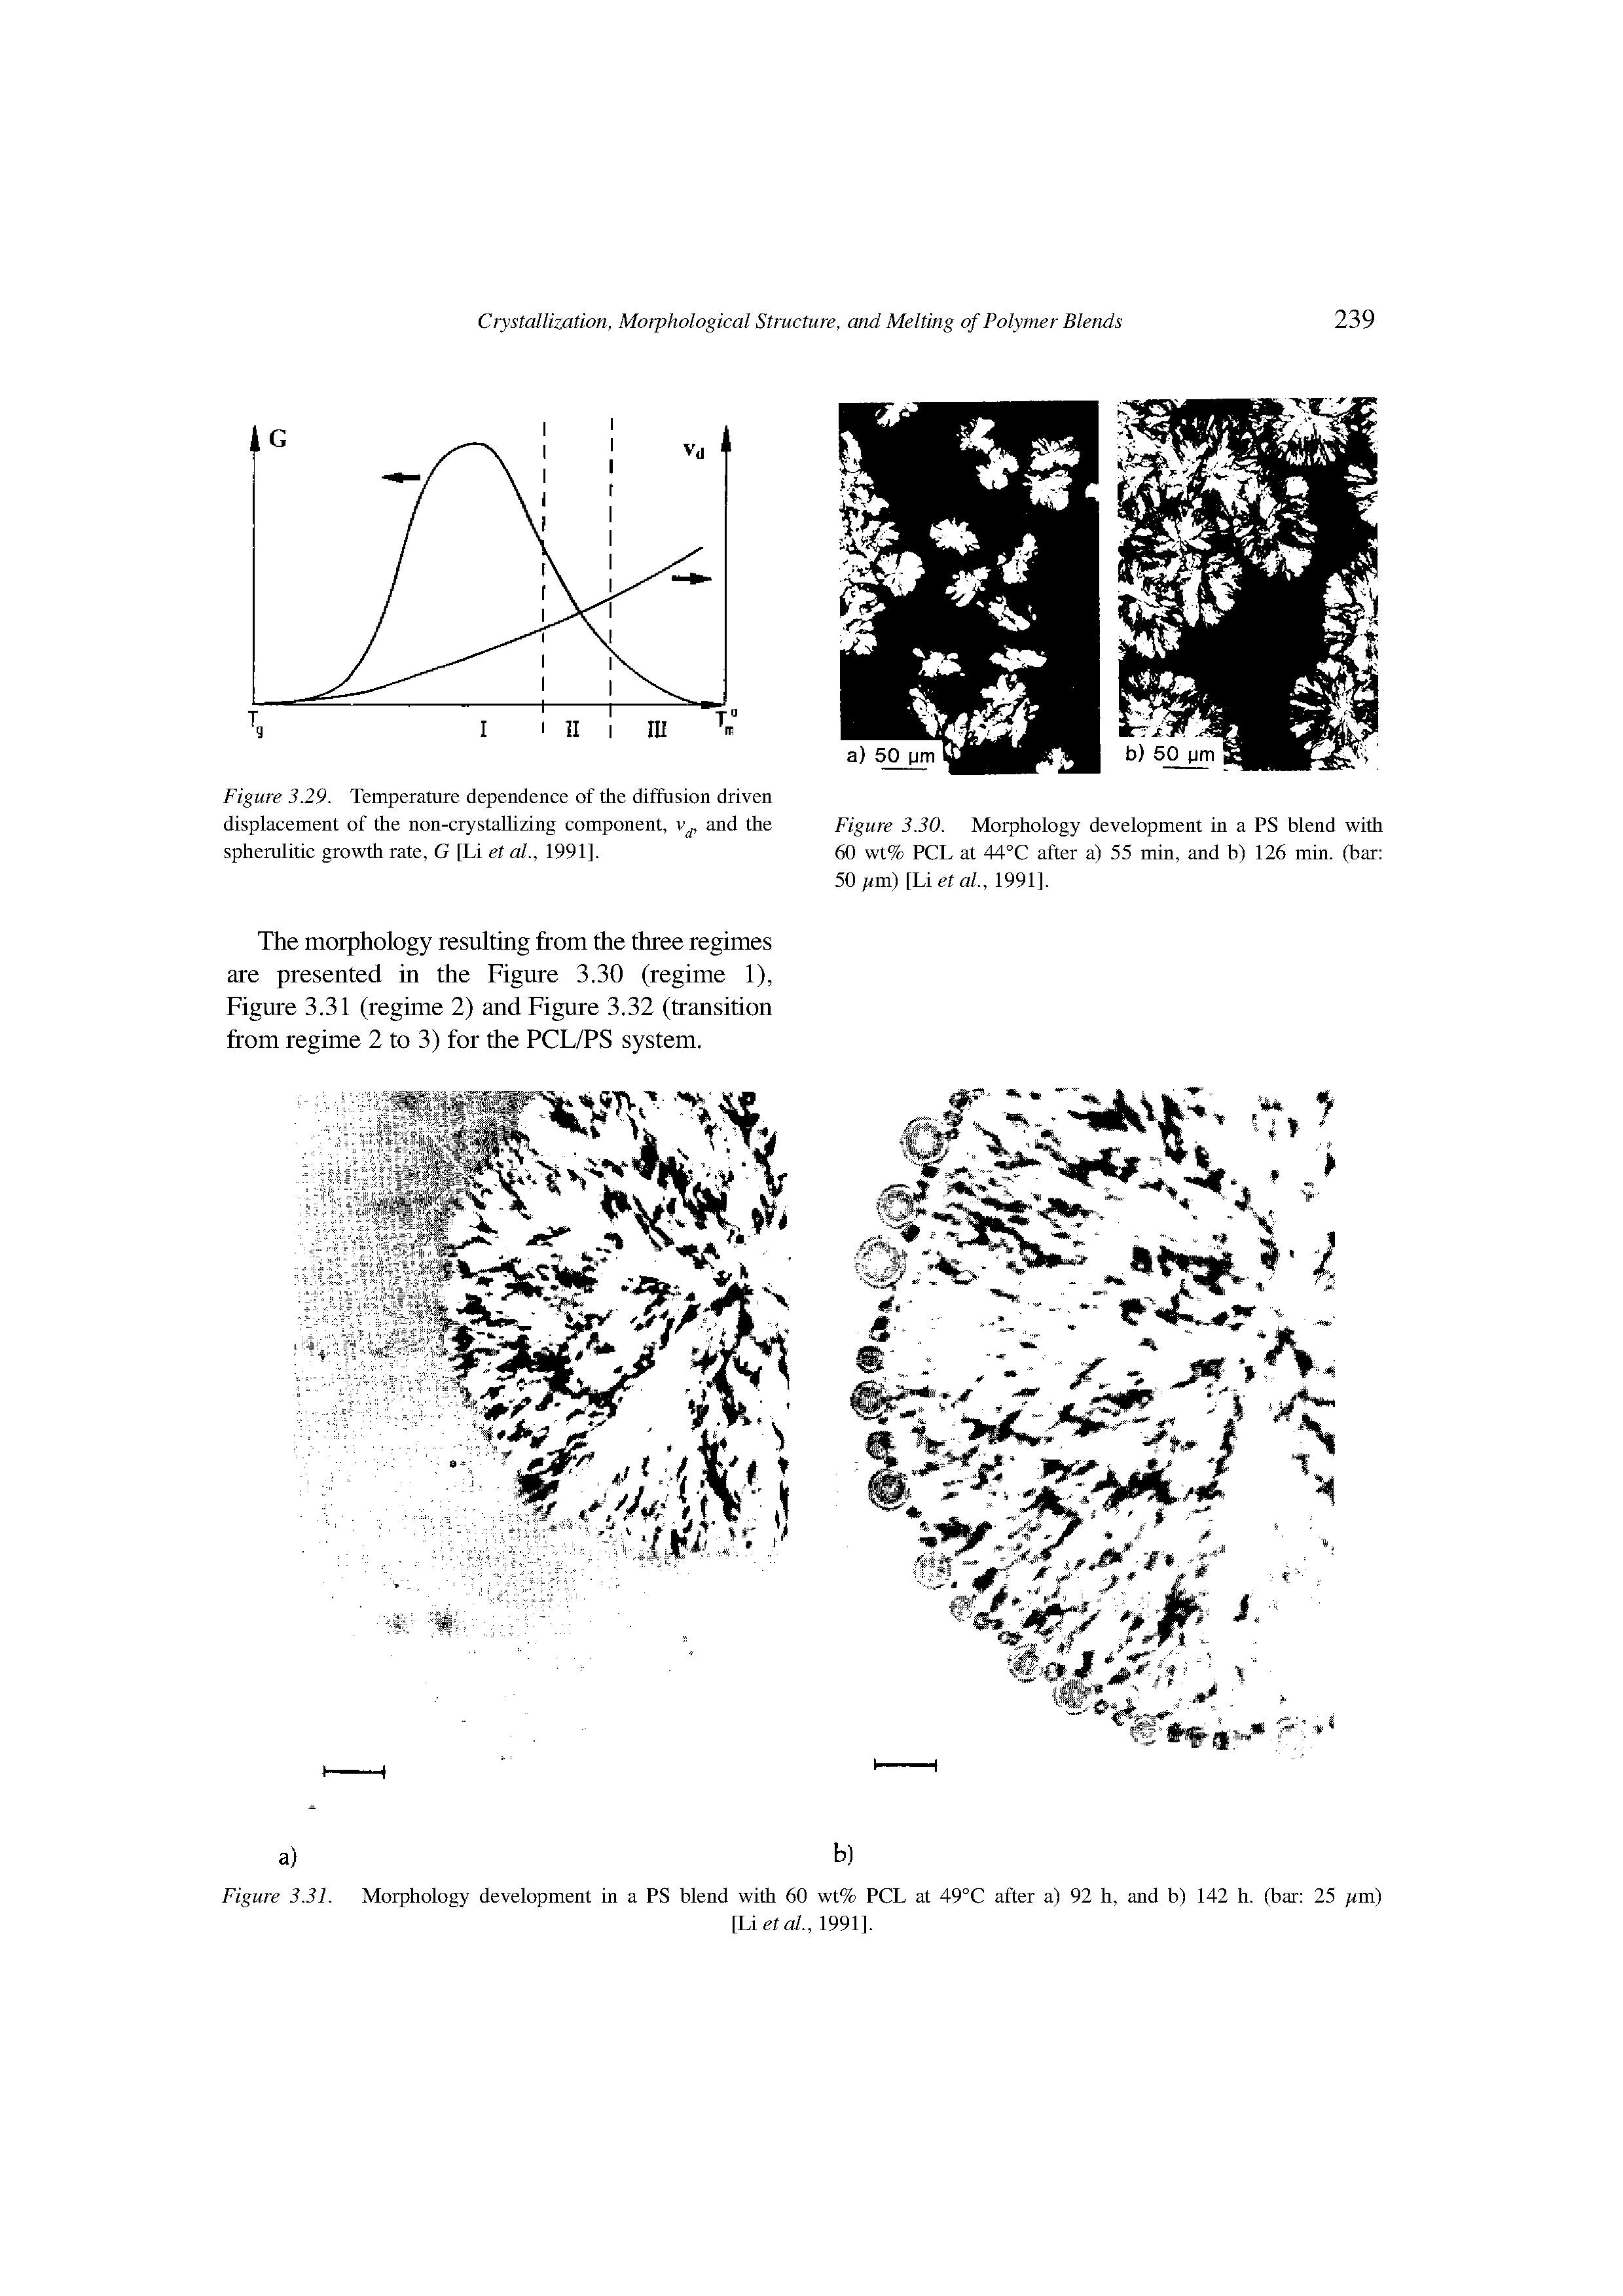 Figure 3.29. Temperature dependence of the diffusion driven displacement of the non-crystallizing component, v, and the sphemlitic growth rate, G [hi et al., 1991].